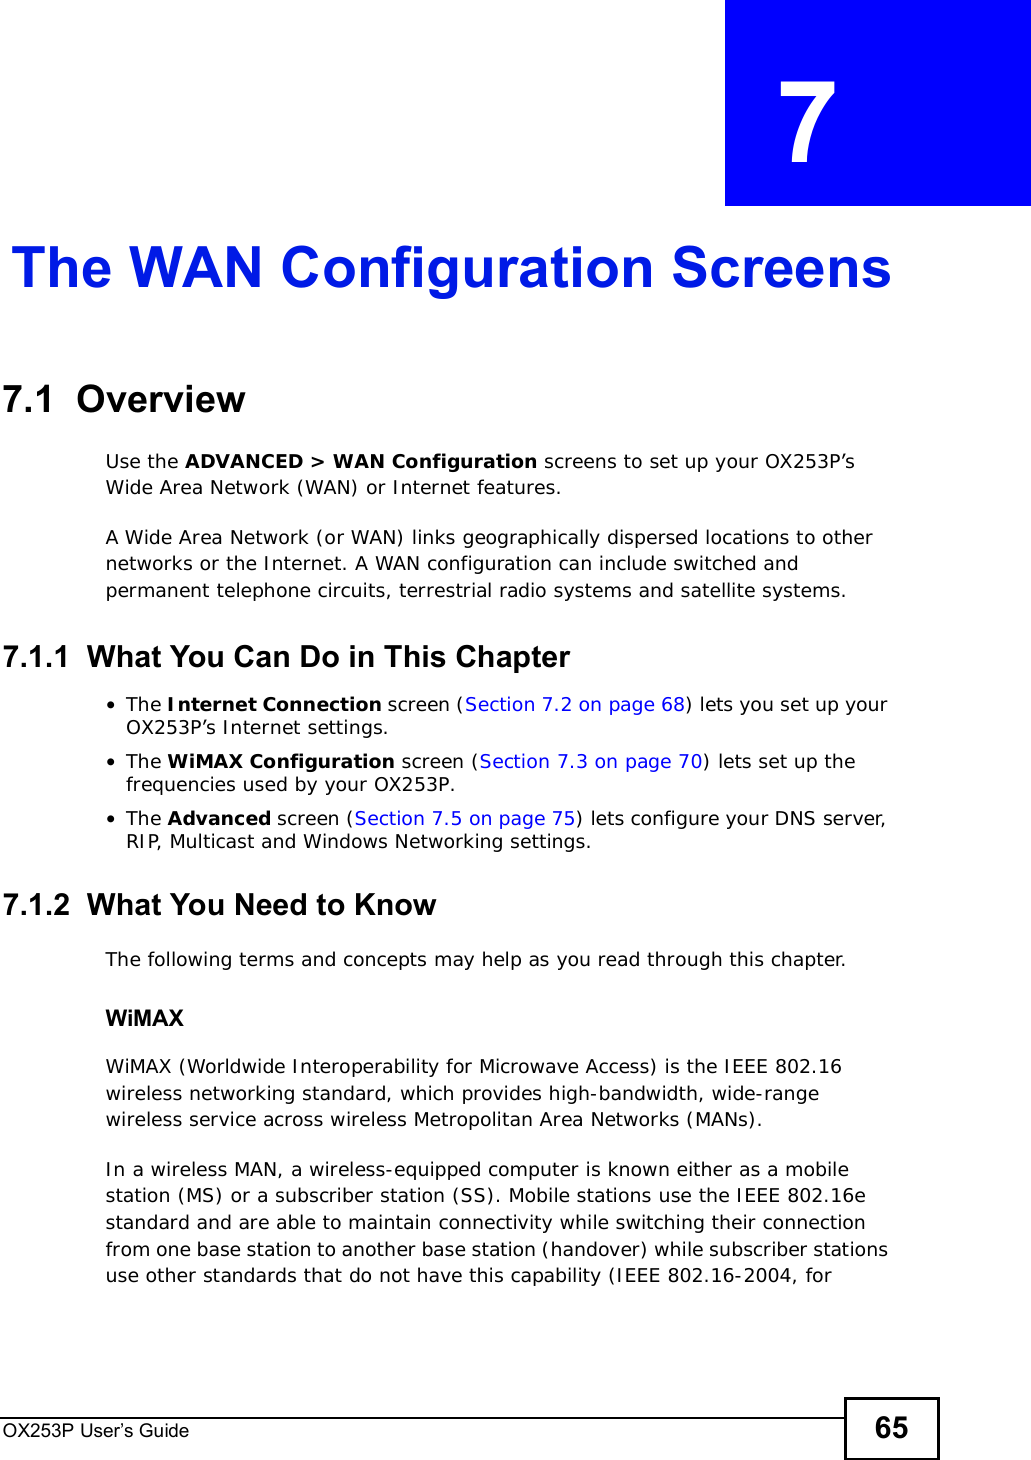 OX253P User’s Guide 65CHAPTER  7 The WAN Configuration Screens7.1  Overview Use the ADVANCED &gt; WAN Configuration screens to set up your OX253P’s Wide Area Network (WAN) or Internet features.A Wide Area Network (or WAN) links geographically dispersed locations to other networks or the Internet. A WAN configuration can include switched and permanent telephone circuits, terrestrial radio systems and satellite systems.7.1.1  What You Can Do in This Chapter•The Internet Connection screen (Section 7.2 on page 68) lets you set up your OX253P’s Internet settings.•The WiMAX Configuration screen (Section 7.3 on page 70) lets set up the frequencies used by your OX253P.•The Advanced screen (Section 7.5 on page 75) lets configure your DNS server, RIP, Multicast and Windows Networking settings.7.1.2  What You Need to KnowThe following terms and concepts may help as you read through this chapter.WiMAX WiMAX (Worldwide Interoperability for Microwave Access) is the IEEE 802.16 wireless networking standard, which provides high-bandwidth, wide-range wireless service across wireless Metropolitan Area Networks (MANs). In a wireless MAN, a wireless-equipped computer is known either as a mobile station (MS) or a subscriber station (SS). Mobile stations use the IEEE 802.16e standard and are able to maintain connectivity while switching their connection from one base station to another base station (handover) while subscriber stations use other standards that do not have this capability (IEEE 802.16-2004, for 